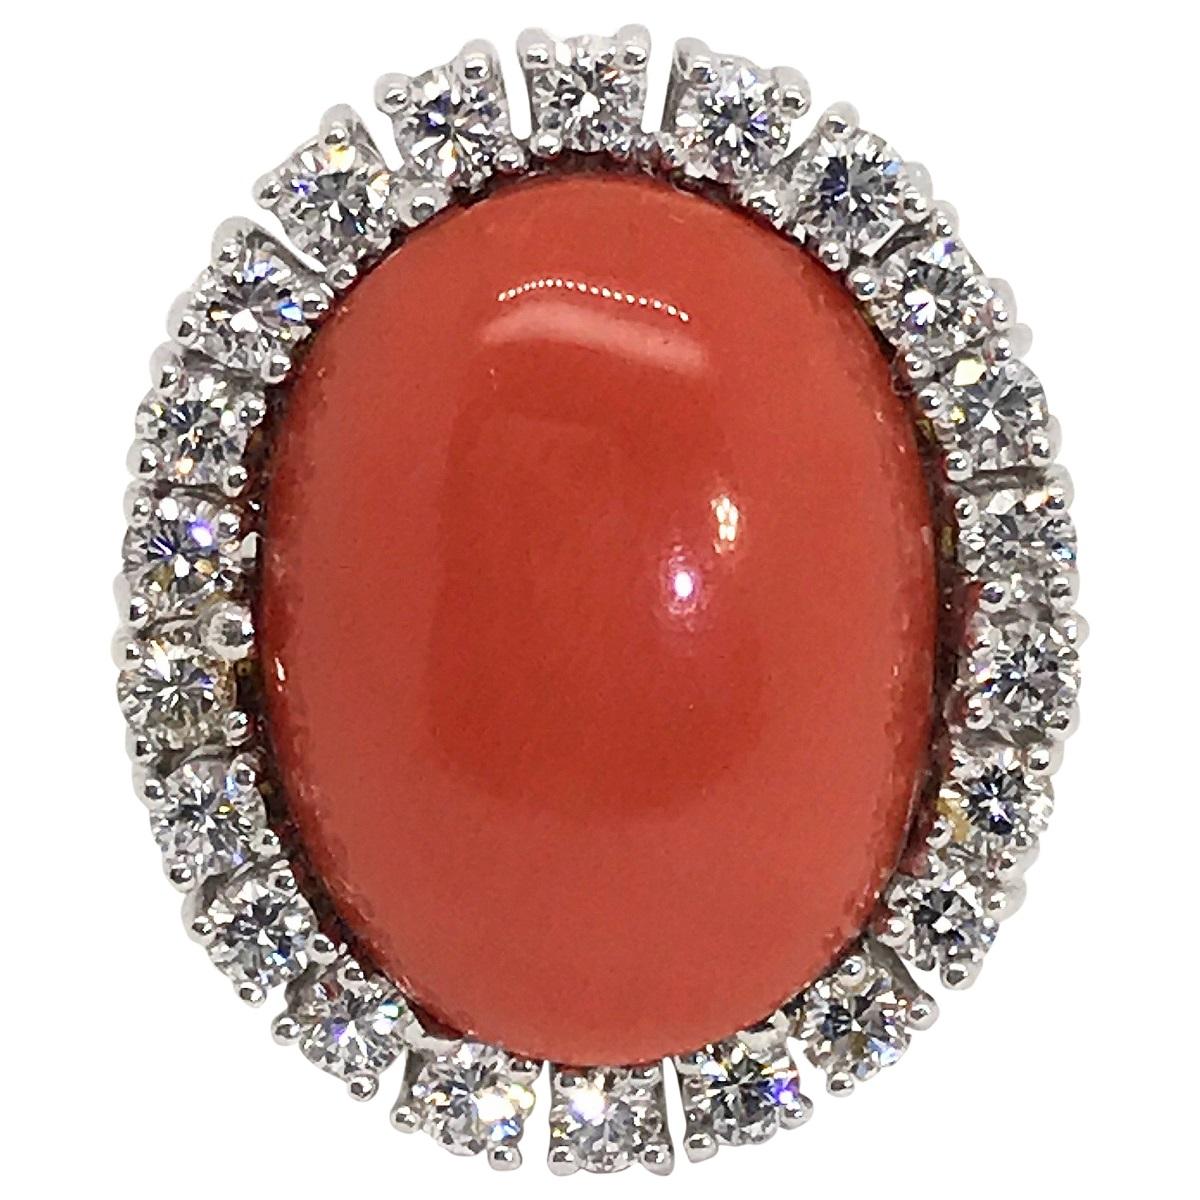 The beautiful tones of coral, it ranges from pale orange pinks through to the deep reds. This ring has a magnificent Italian Rubram coral measuring 0.511 x 0.669 inches (1.30cm x 1.70cm) with a high polish and an intense orange red colour.